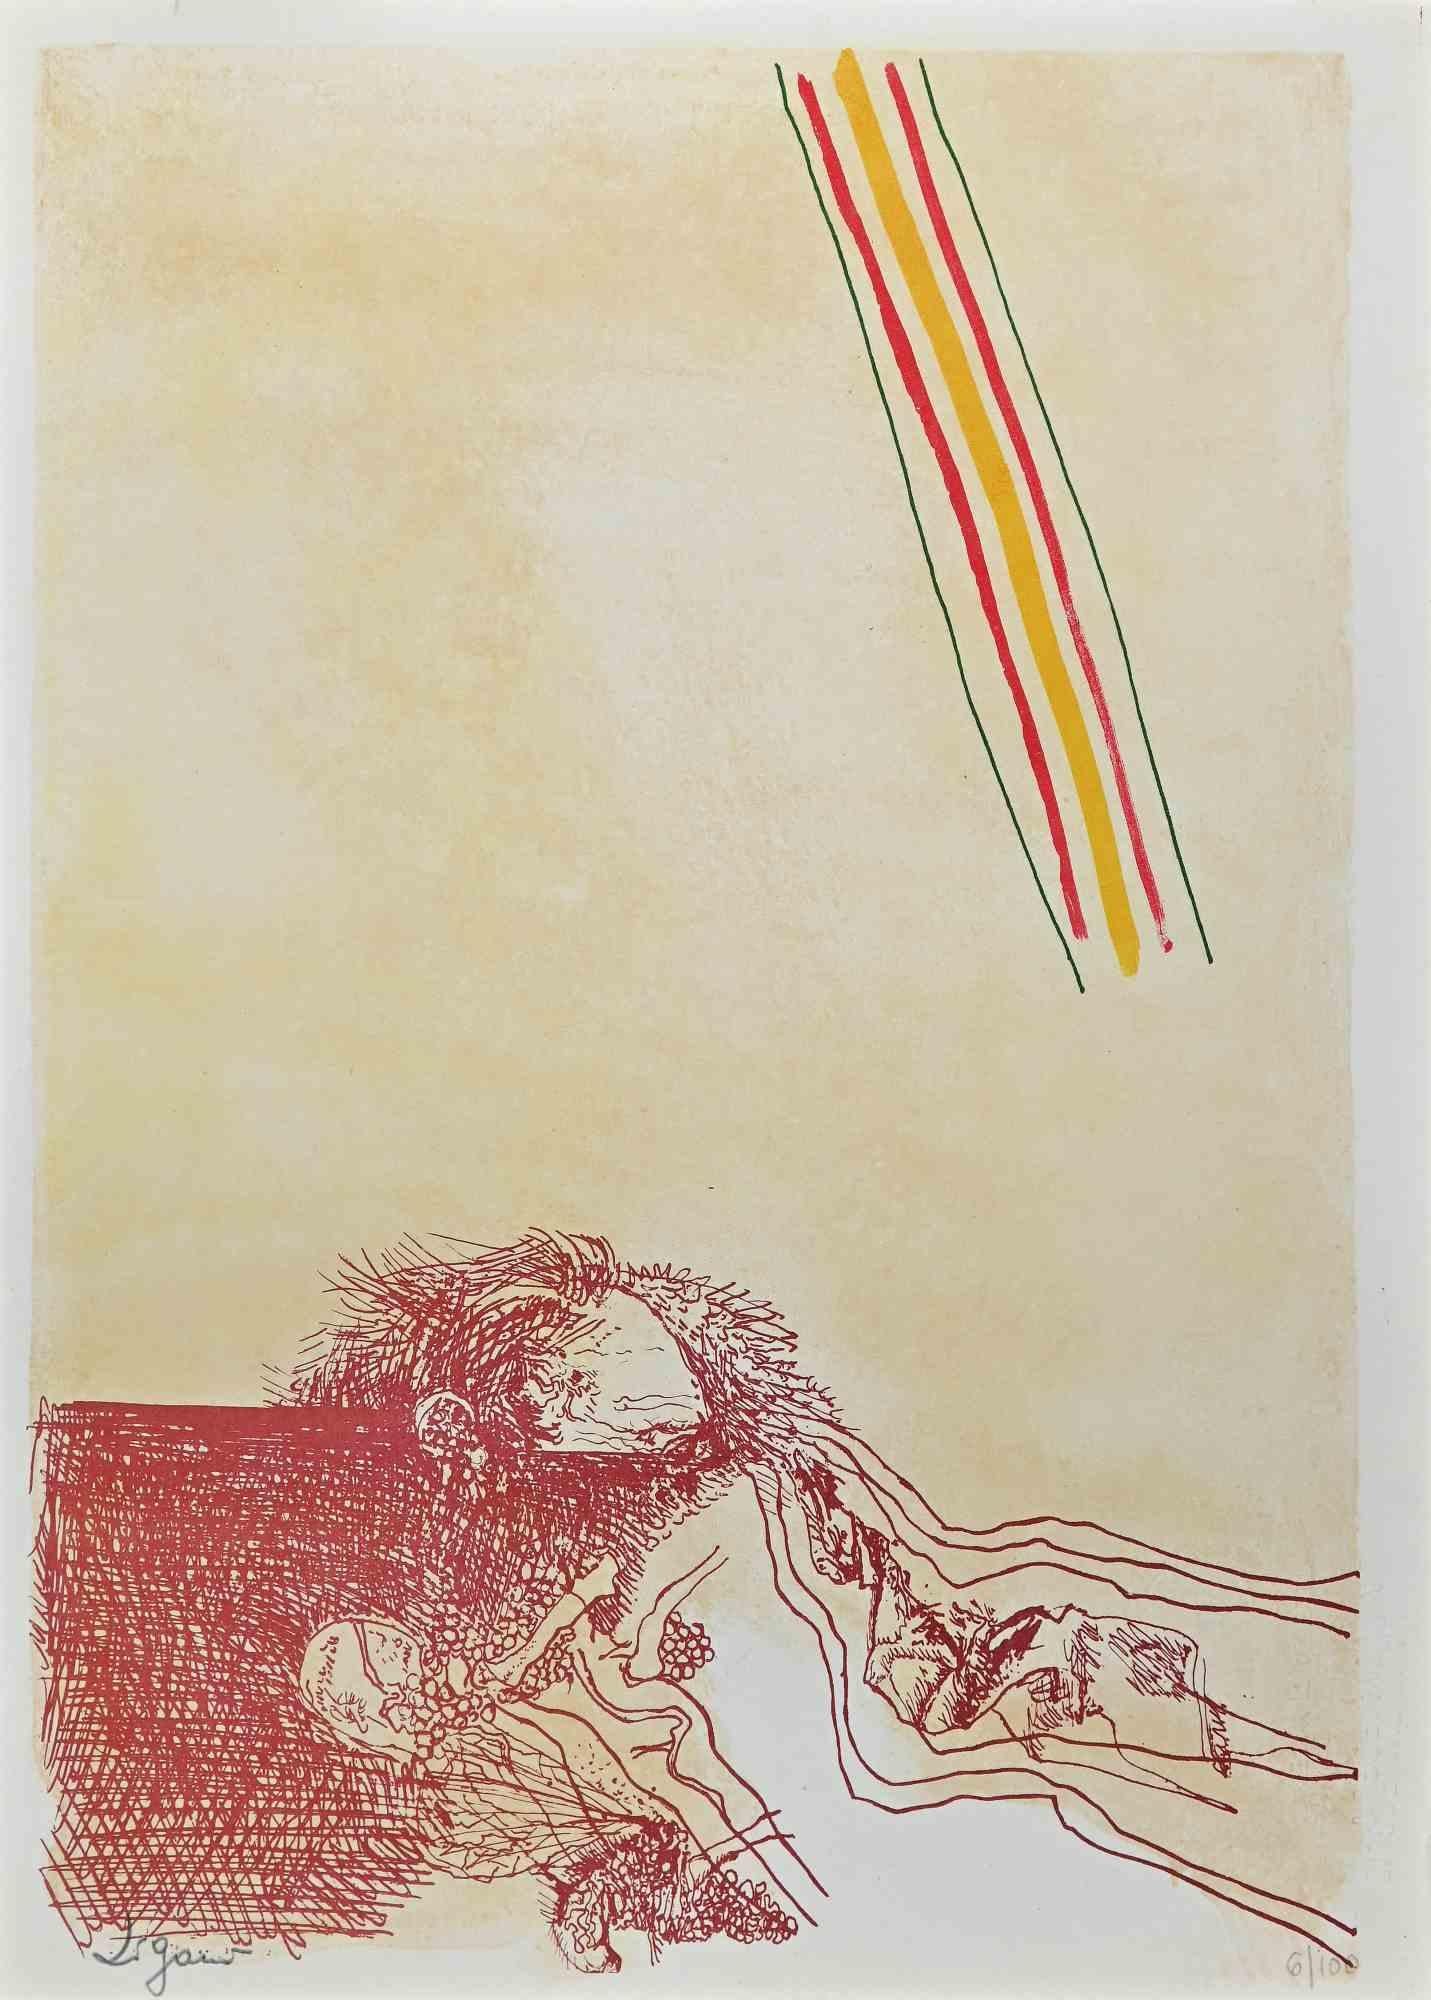 Composition is a wonderful colored lithograph on paper, realized in 1973 by the Italian artist  Giuseppe Zigaina, and published by La Nuova Foglio, the publishing house of Macerata.

Hand-signed and numbered in pencil on the lower margin. Edition of